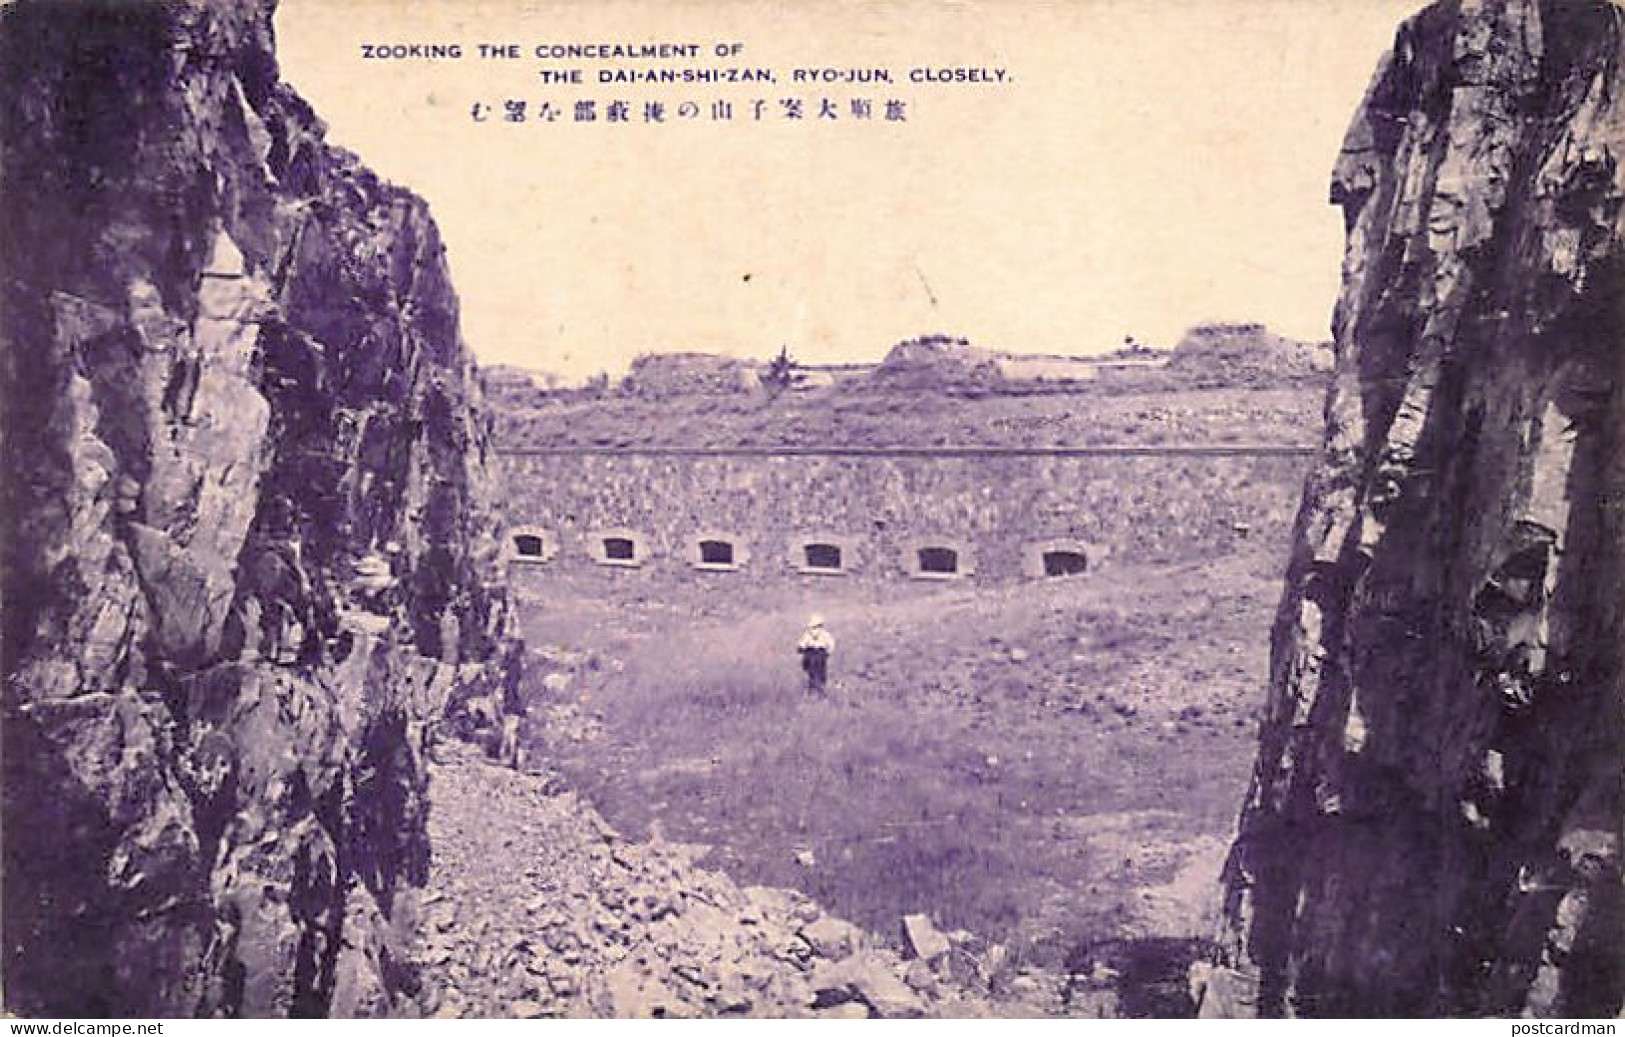 China - Russo-Japanese War - Inside The Fortress Of Port-Arthur In Manchuria (Lüshunkou District, In The City Of Dalian) - China